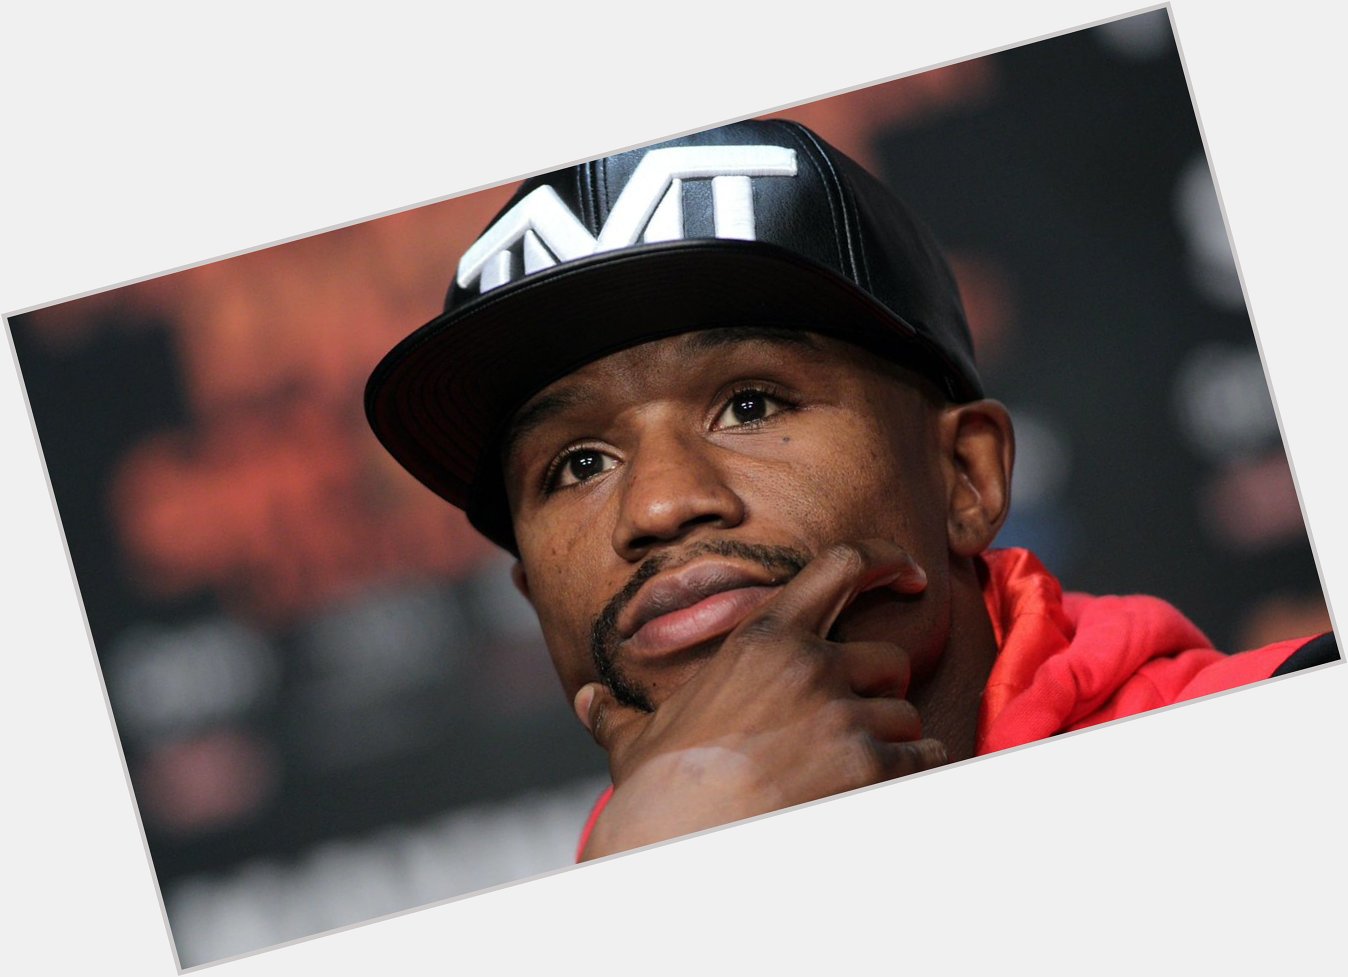  ON WITH Wishes:
Floyd Mayweather Jr. A Happy Birthday! 